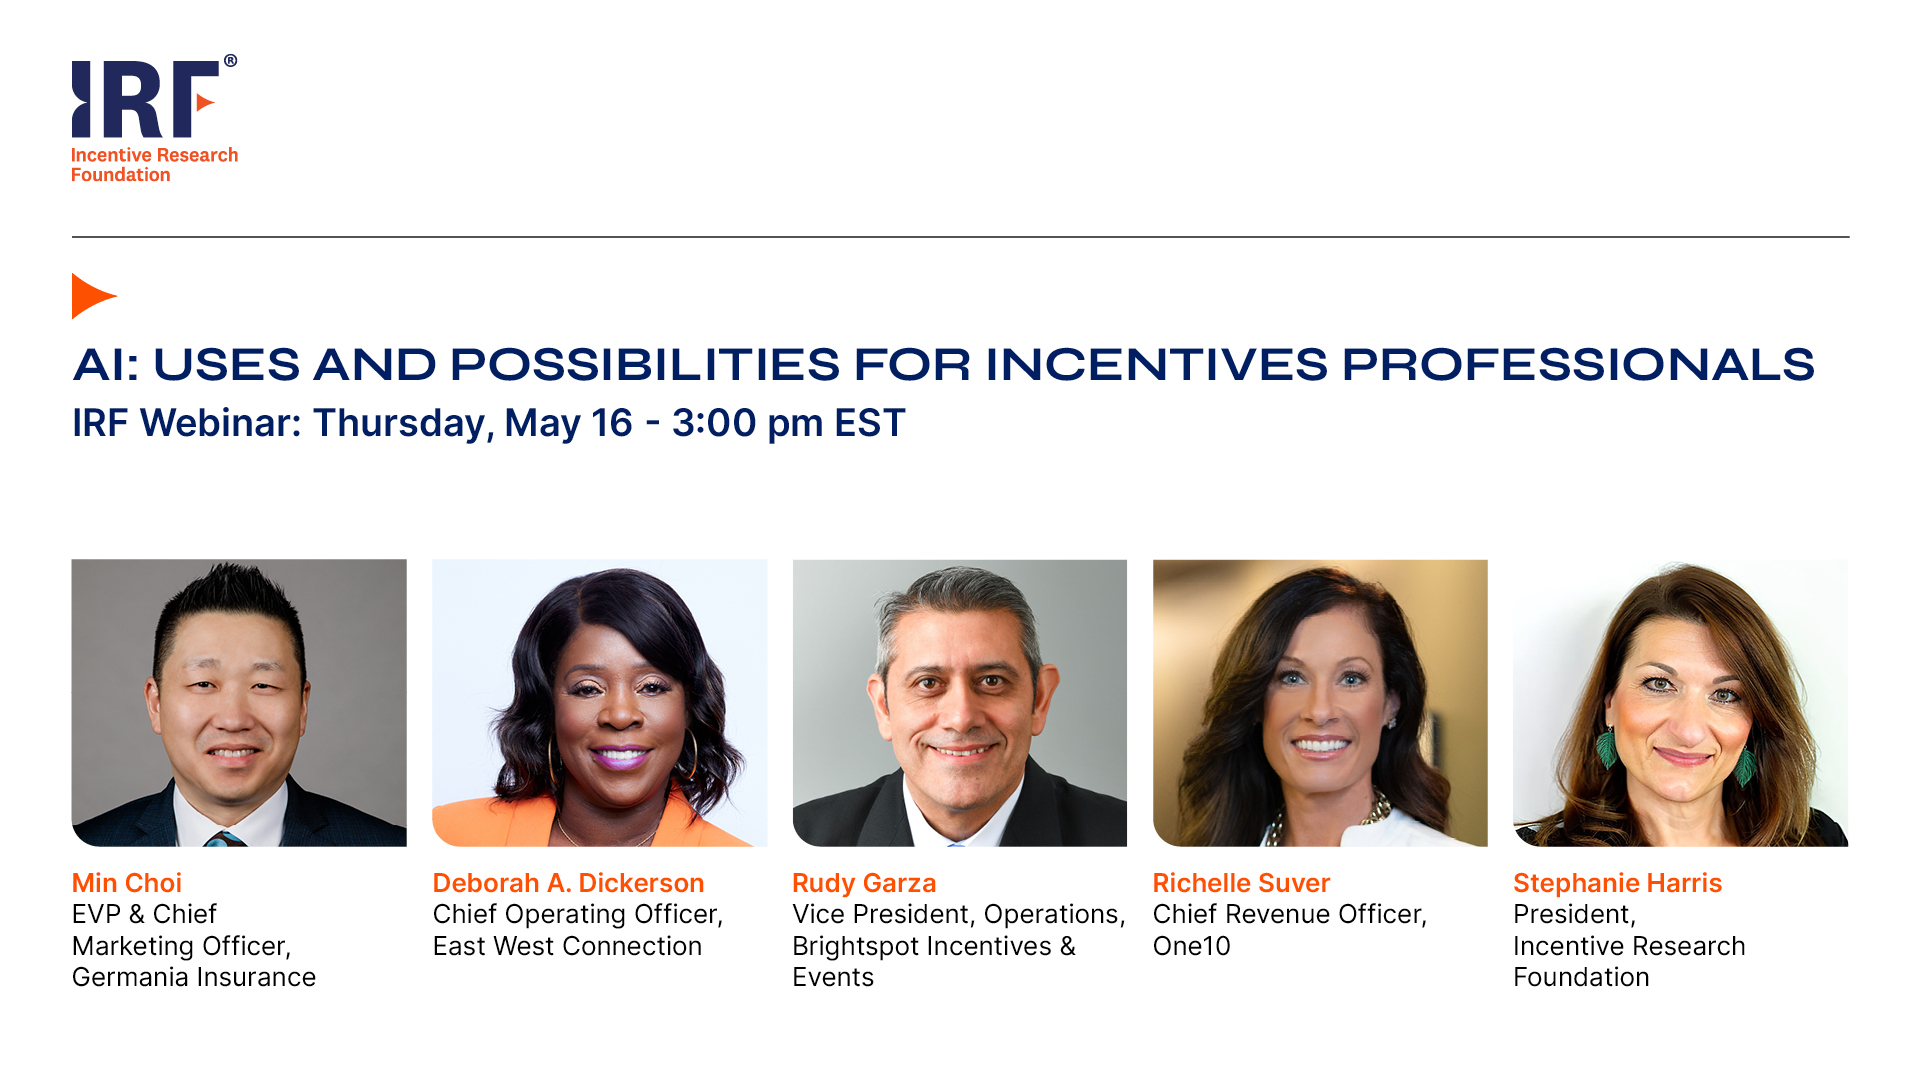 IRF Webinar: AI- Uses and Possibilities for Incentives Professionals